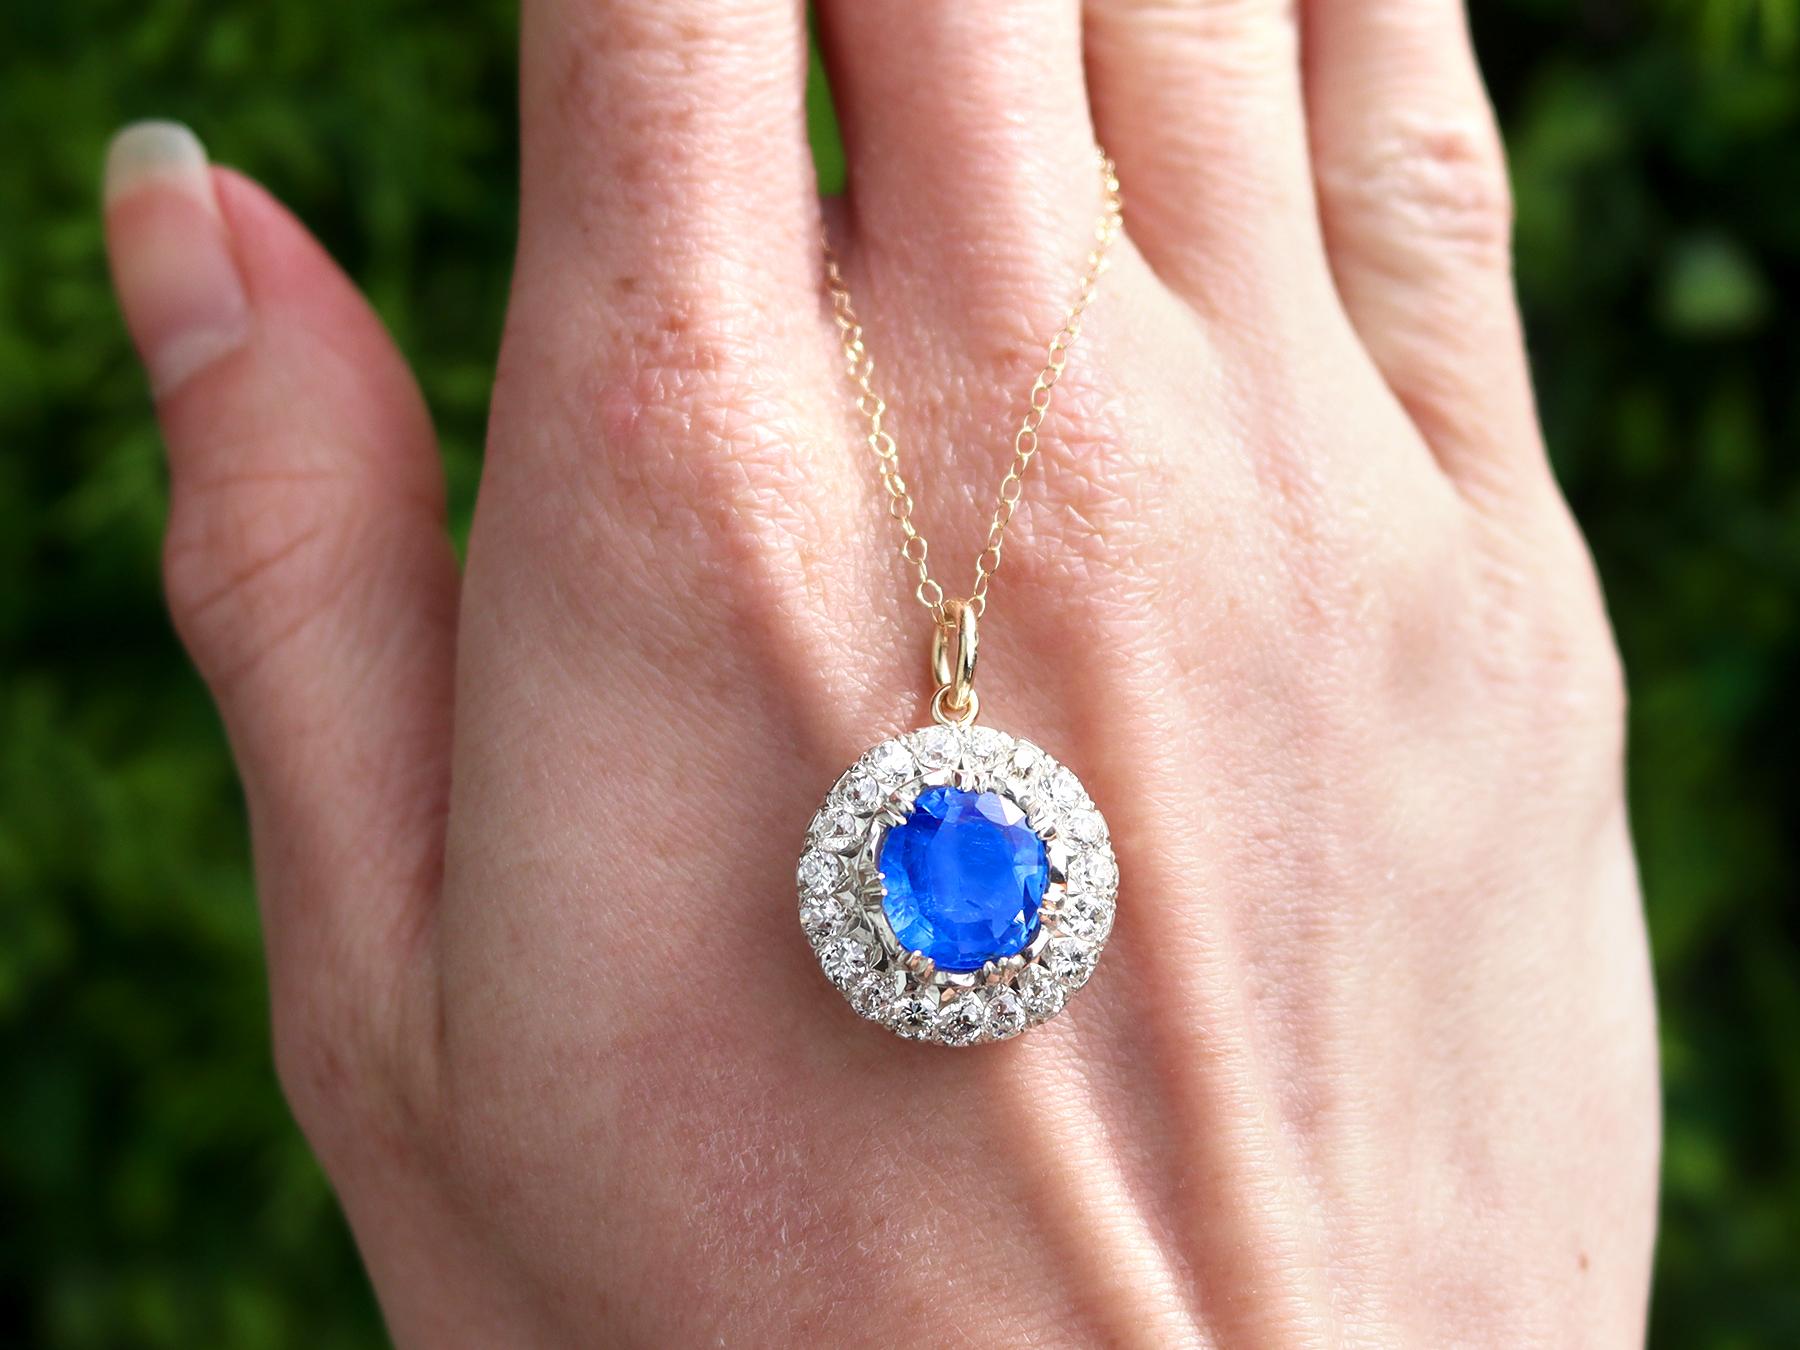 A stunning, fine and impressive 3.58 carat Ceylon blue sapphire and 2.02 carat diamond, 15 karat yellow gold and silver set pendant; an addition to our antique jewelry and estate jewelry collections.

This stunning, fine and impressive antique